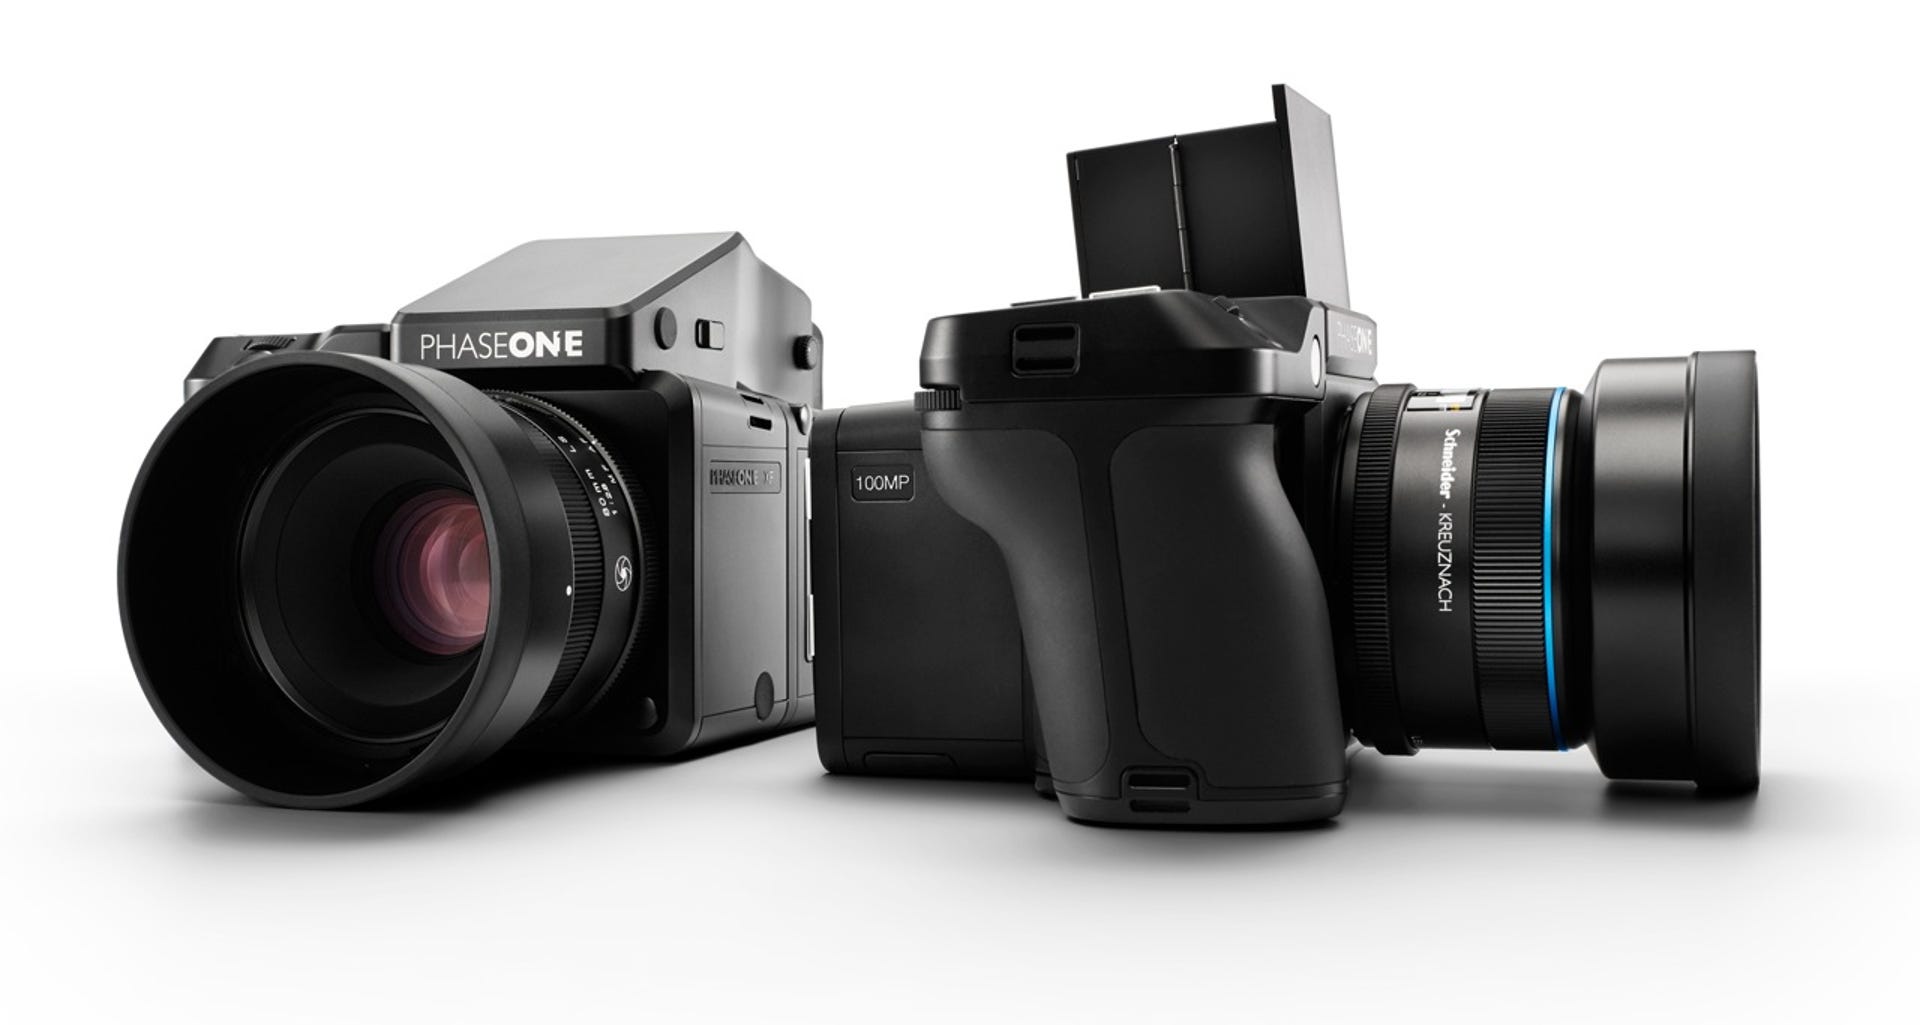 The Phase One XF 100MP ​system shown here combines a camera body, 100-megapixel image sensor module, and lens.